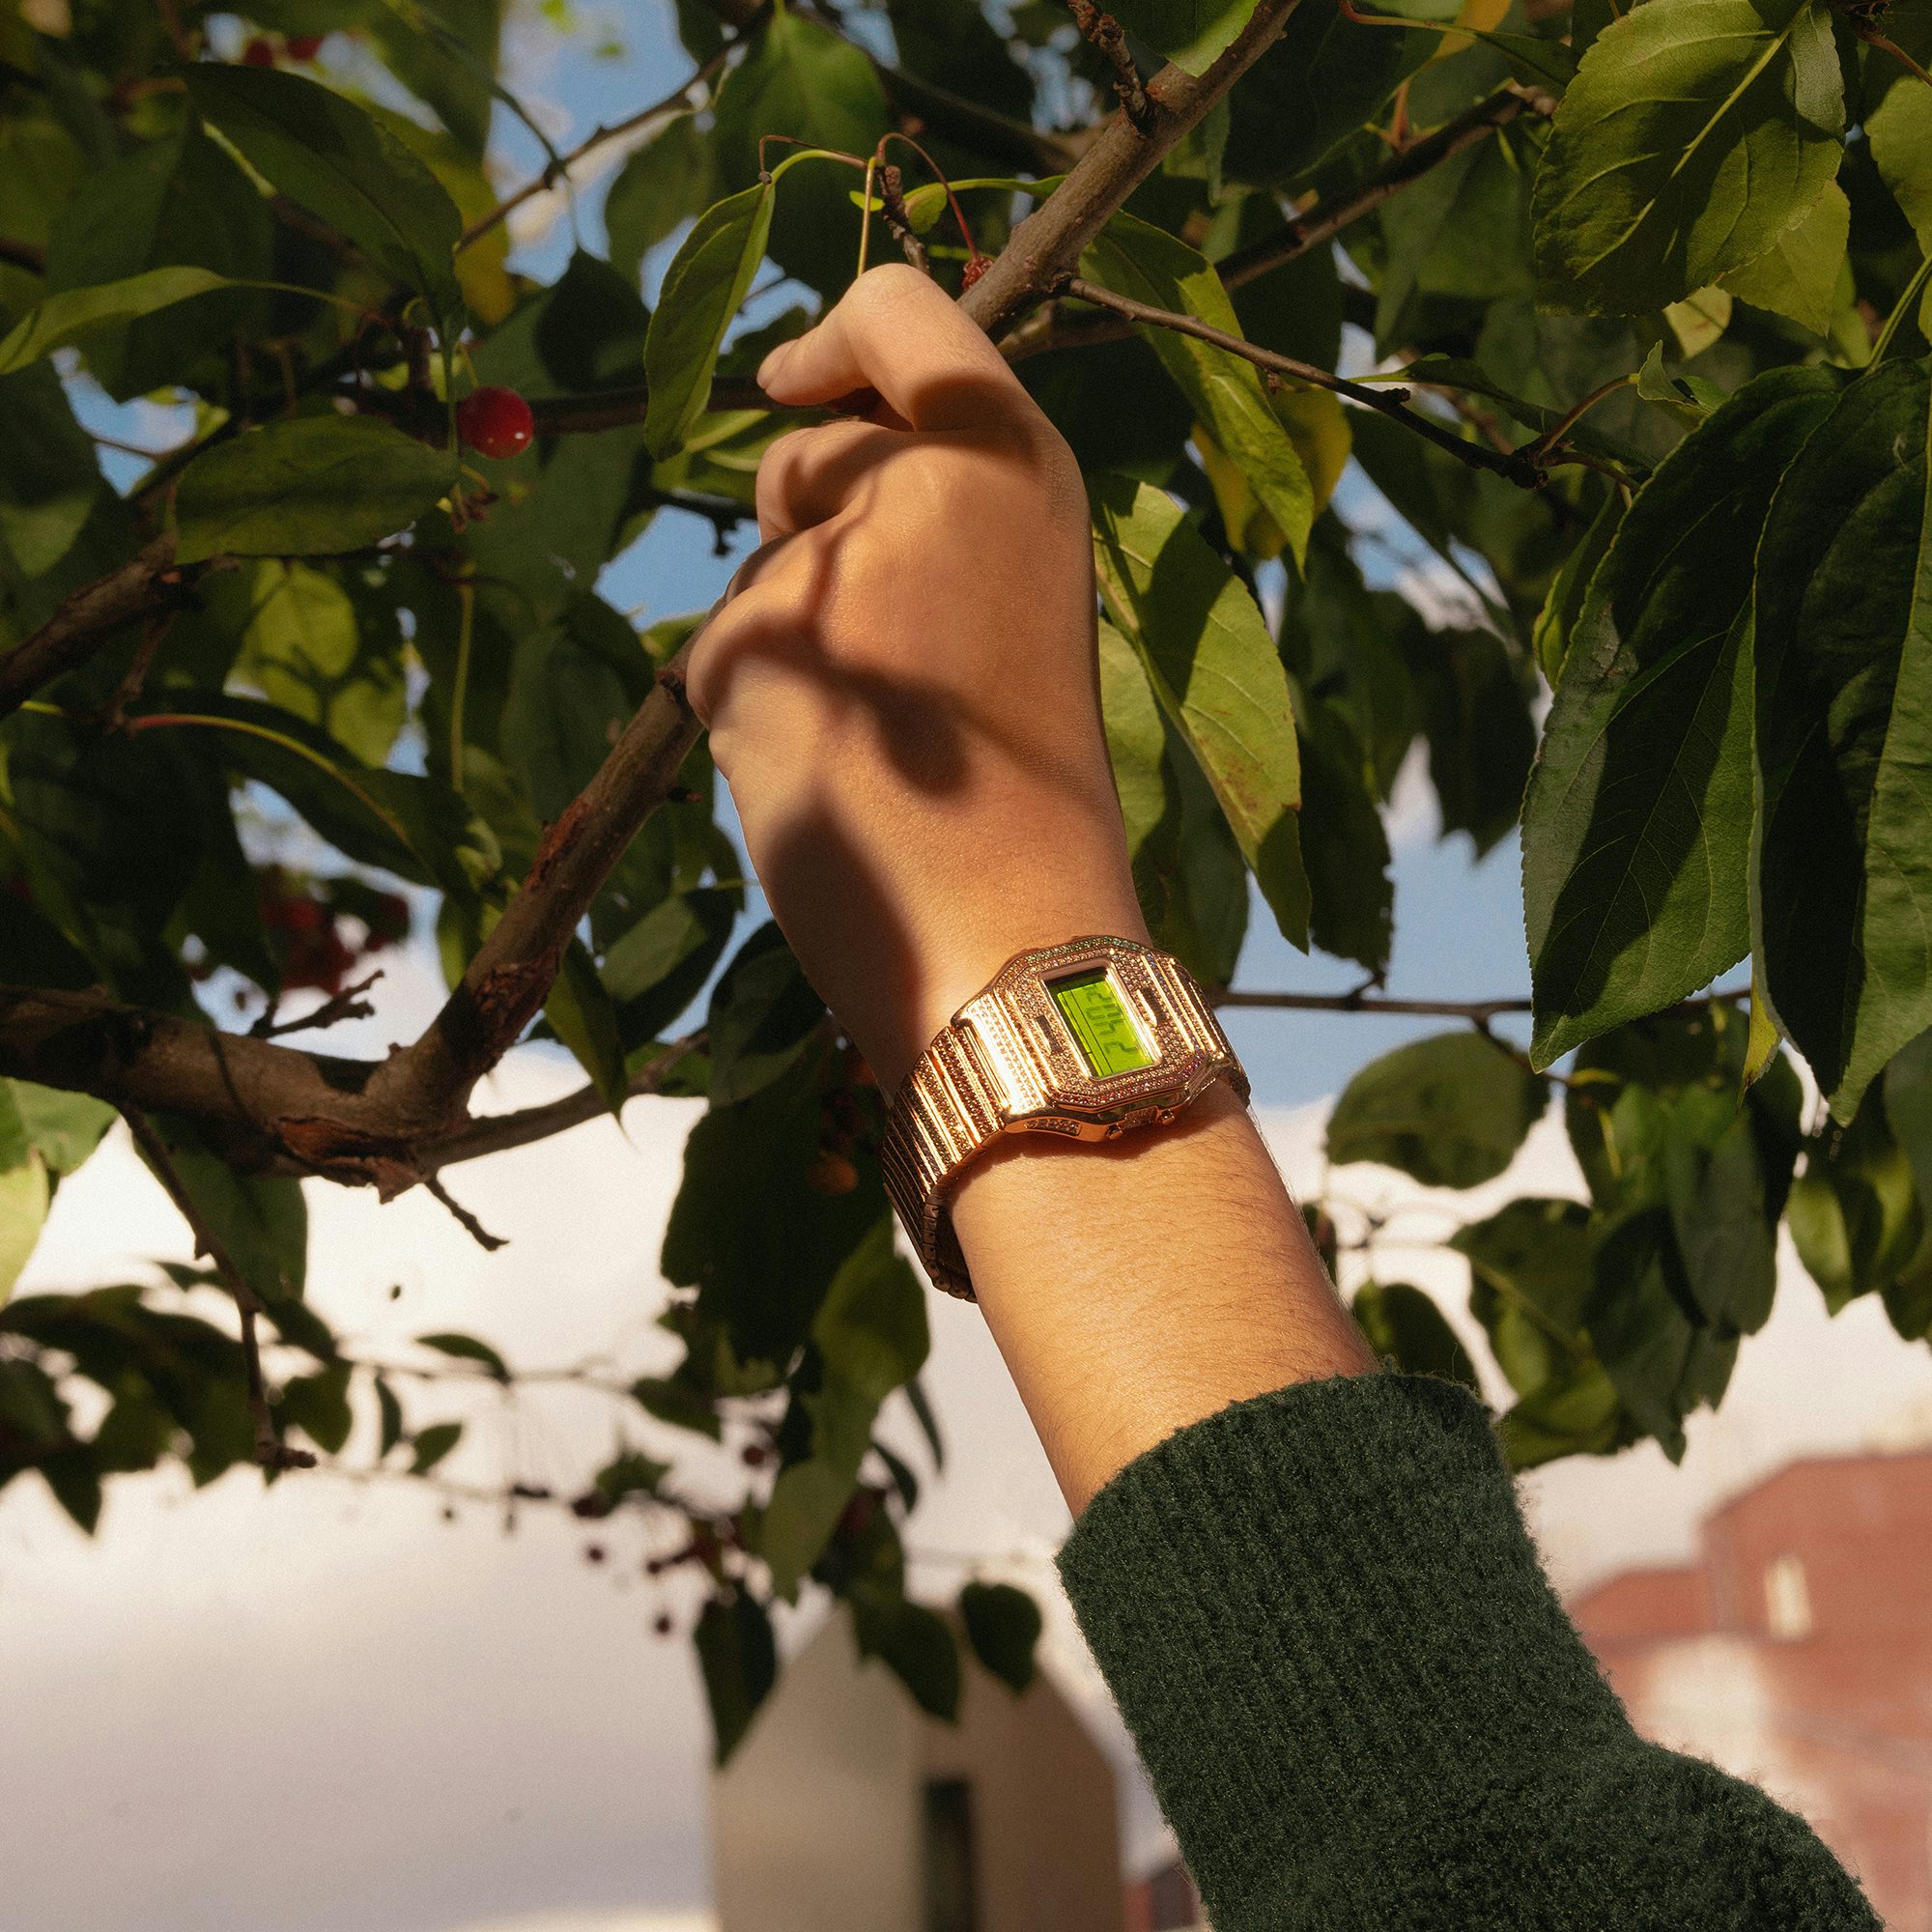 A person wearing a Timex watch and reaching into a tree